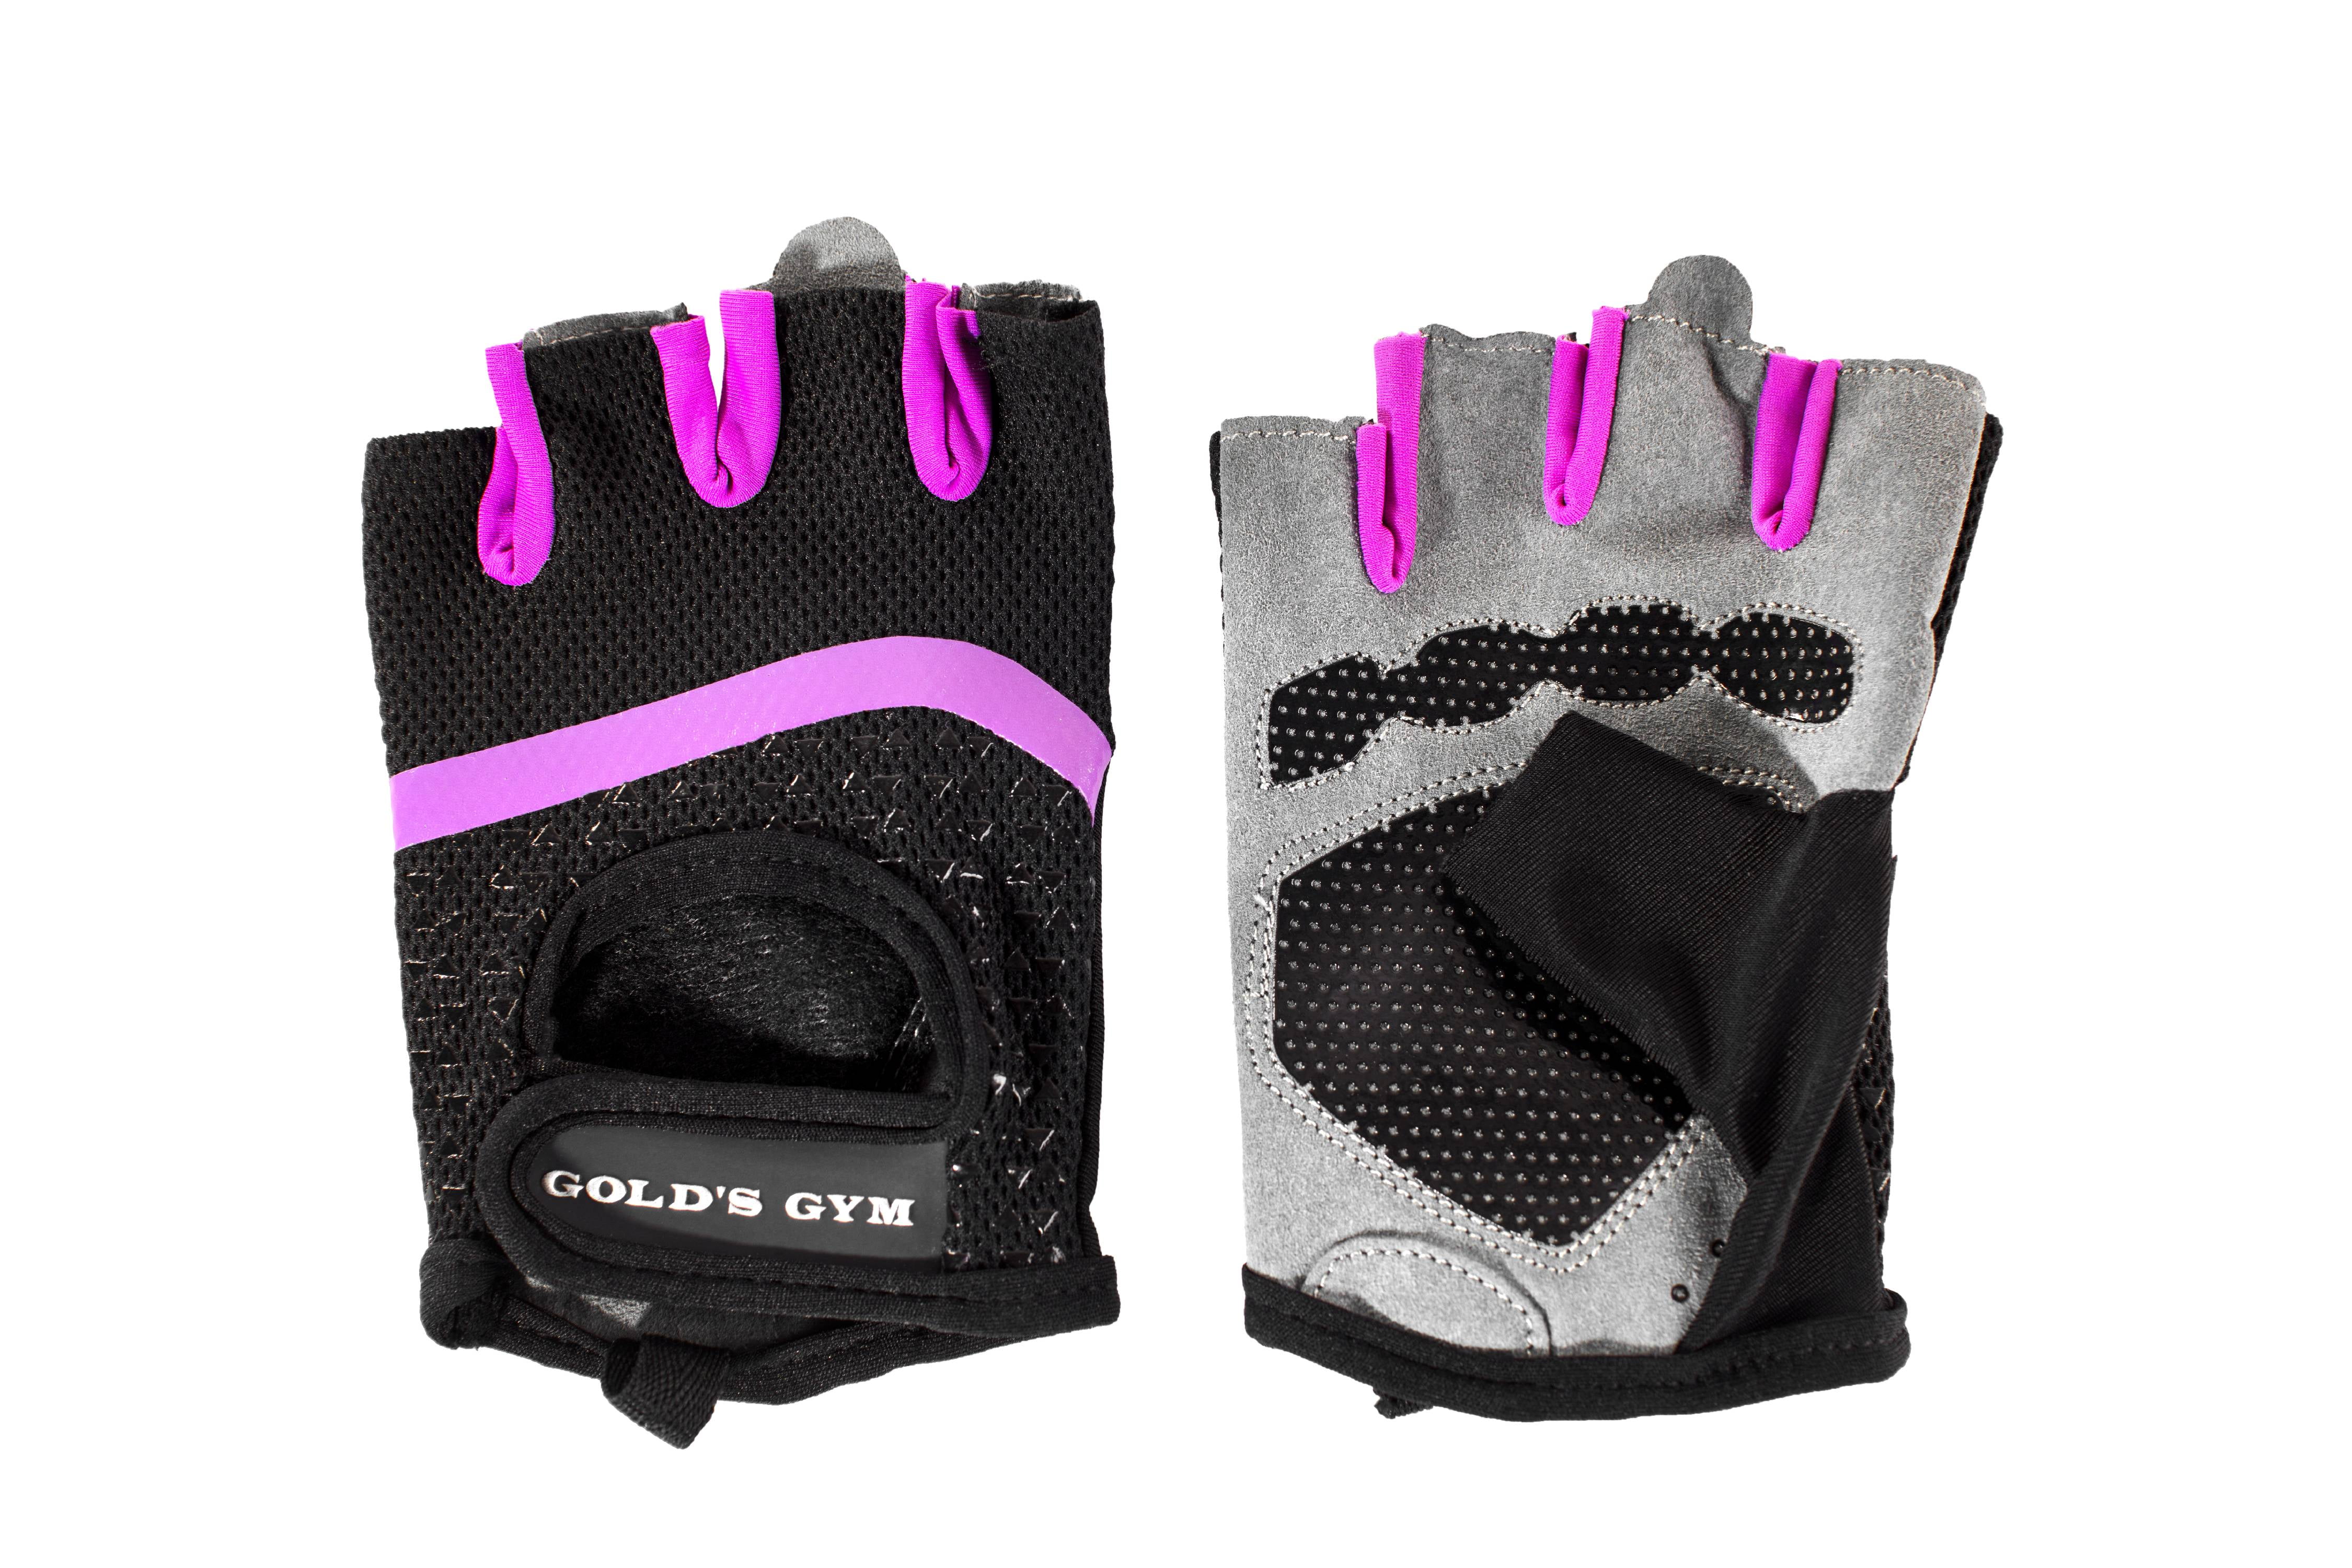 M/L Gold's Gym Women's Tacky Half-finger Weight Lifting Gloves 